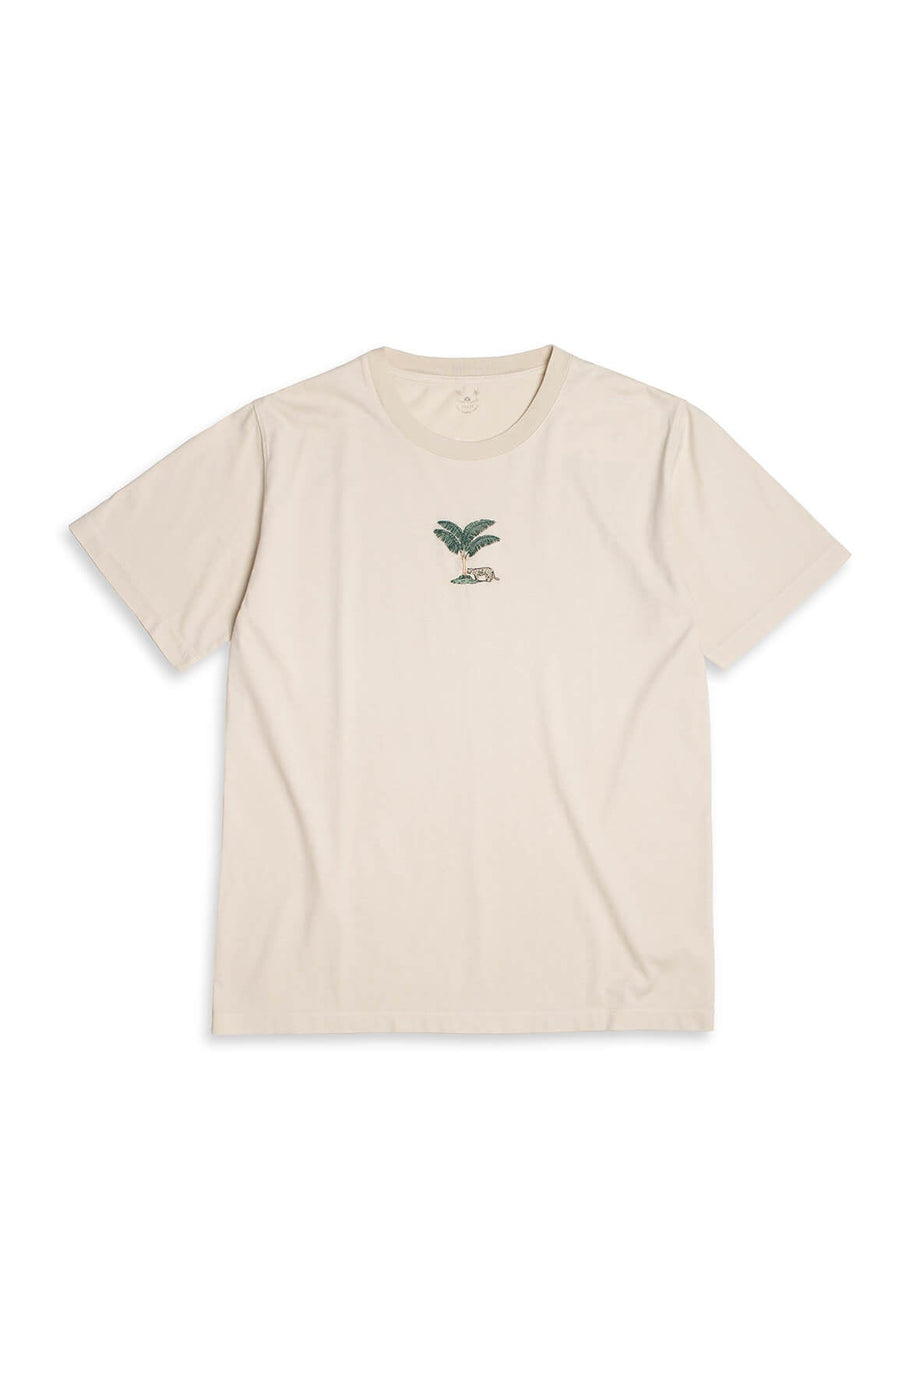 Men’s Cotton Embroidered Tee Off White